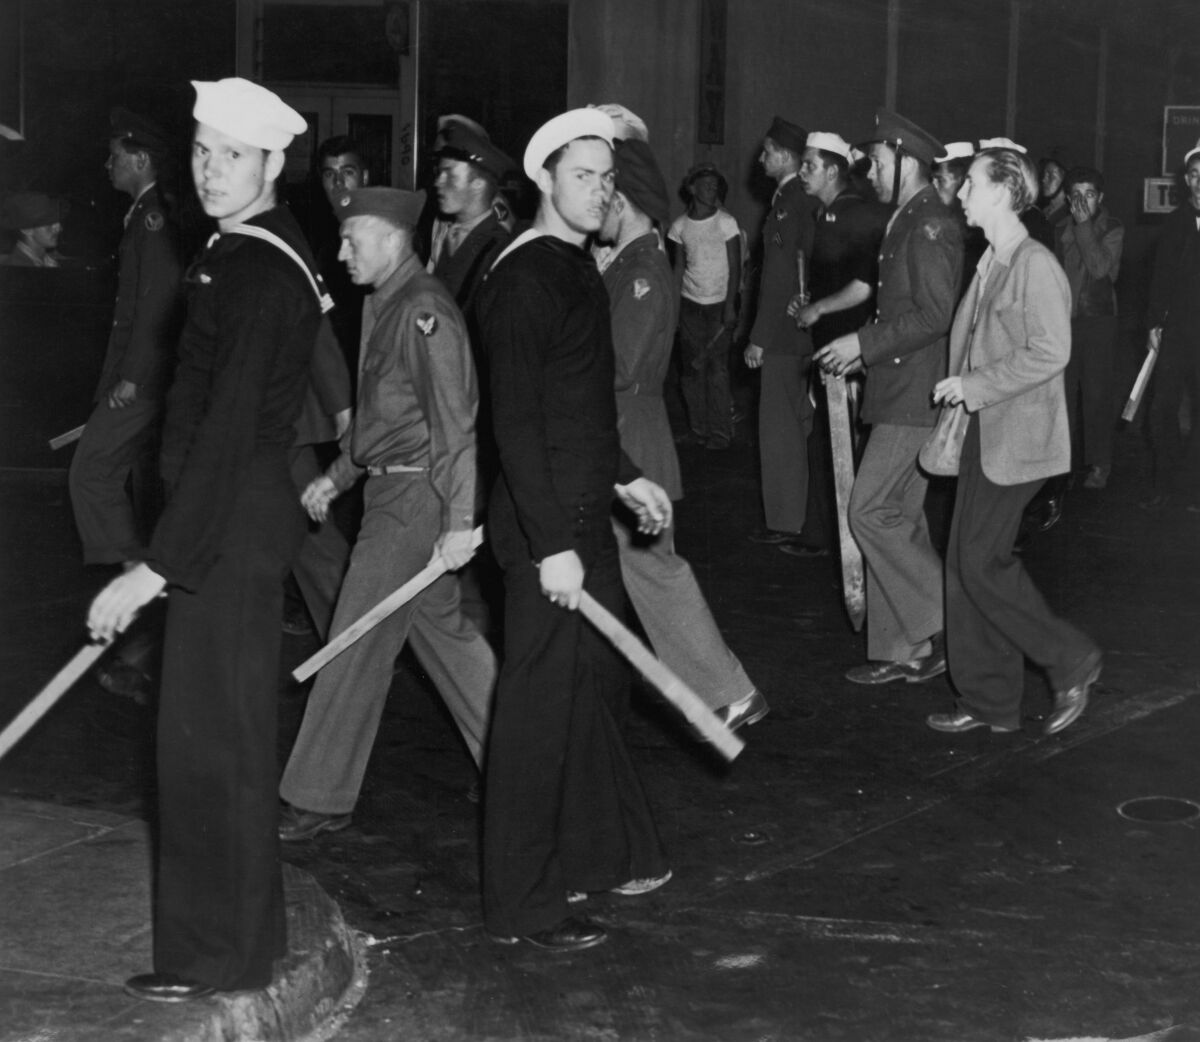 People in sailor and armed forces uniforms walk on a street, some holding sticks.